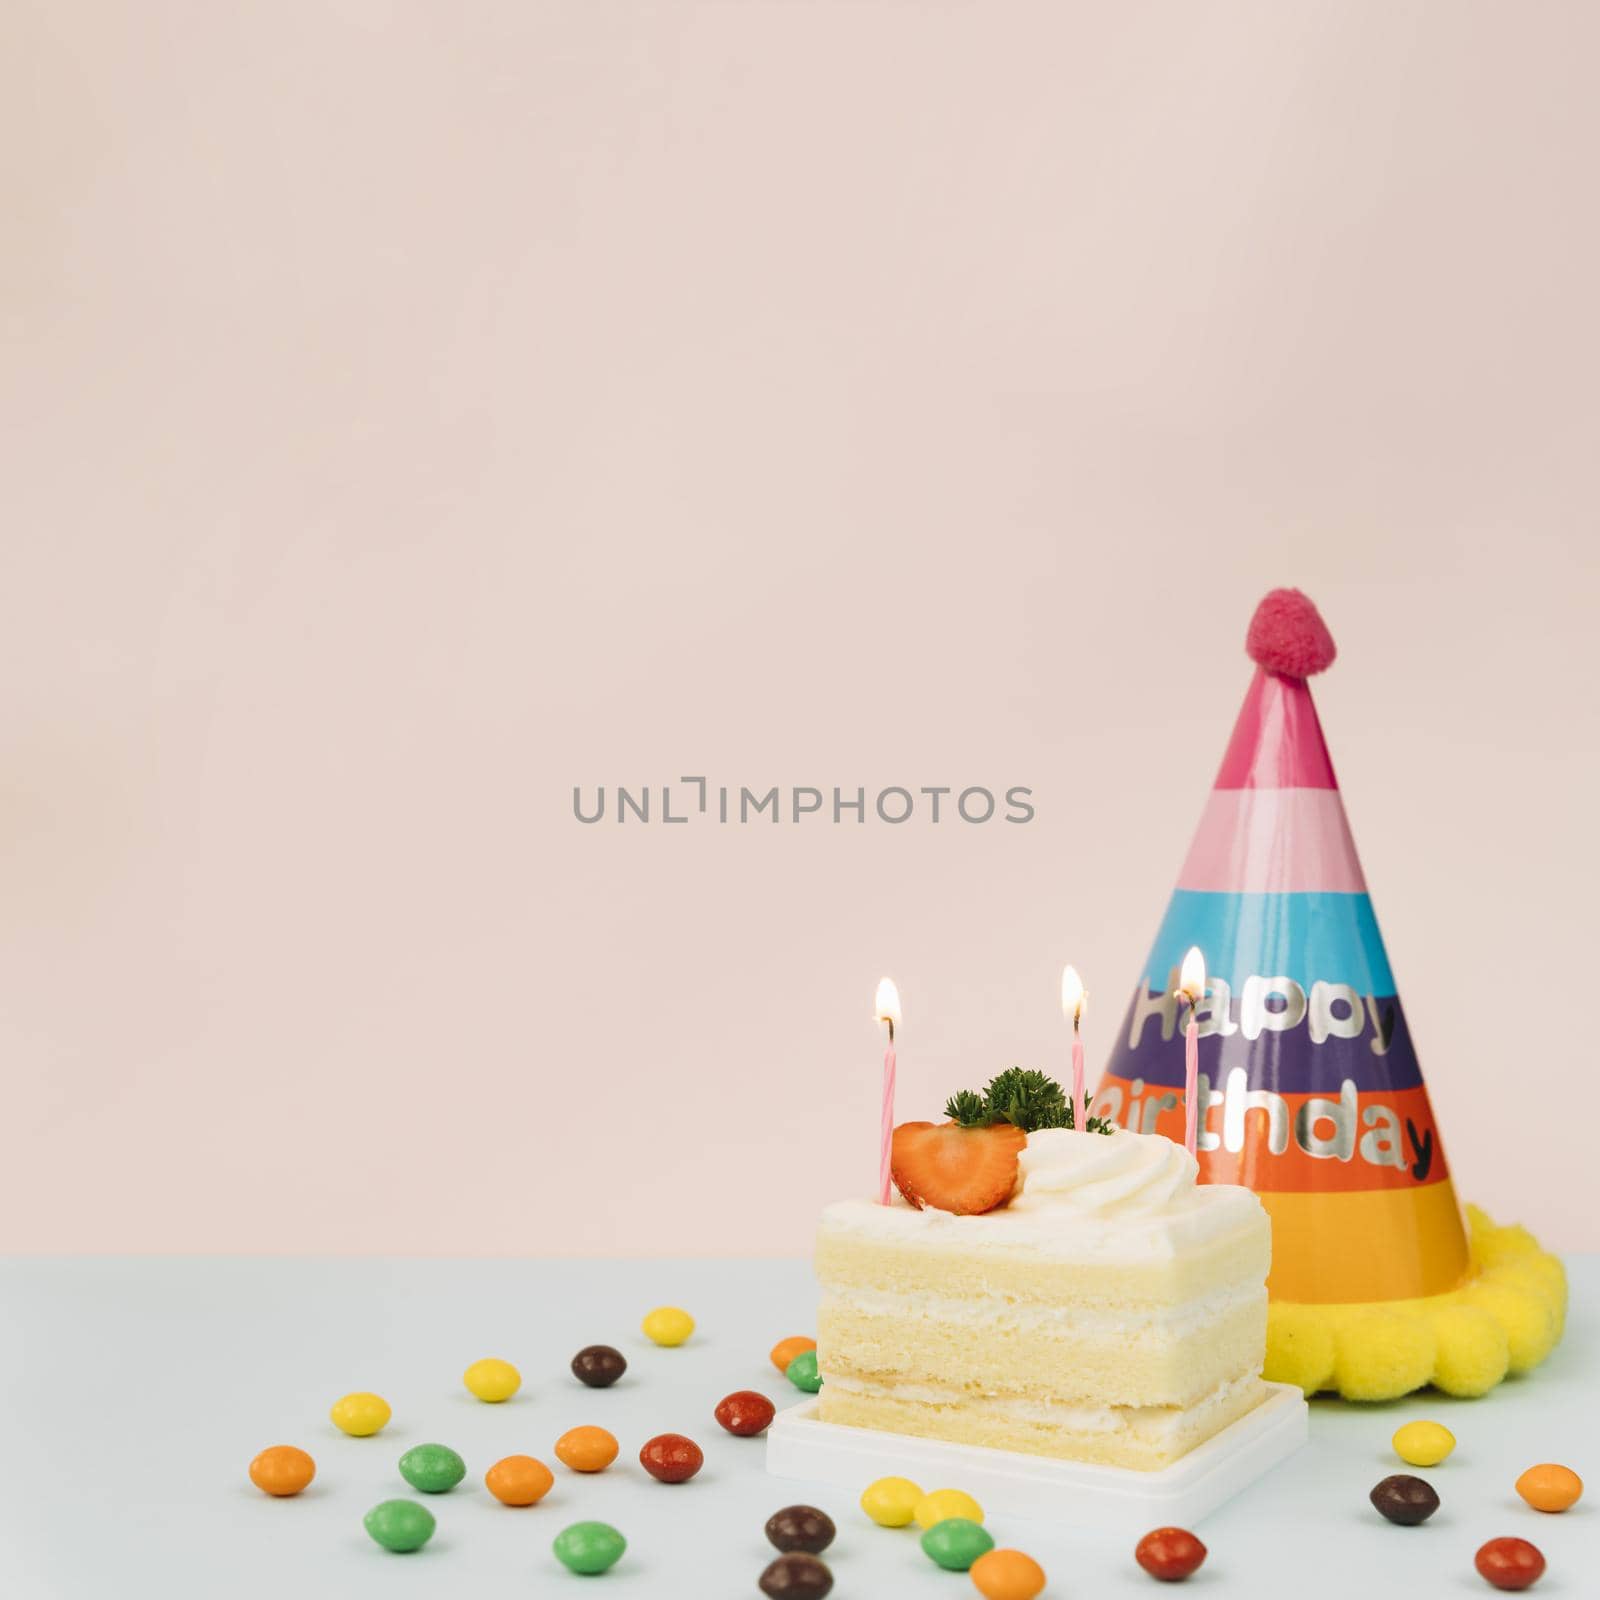 lighted candles cake candies birthday hat against colored background. High quality beautiful photo concept by Zahard